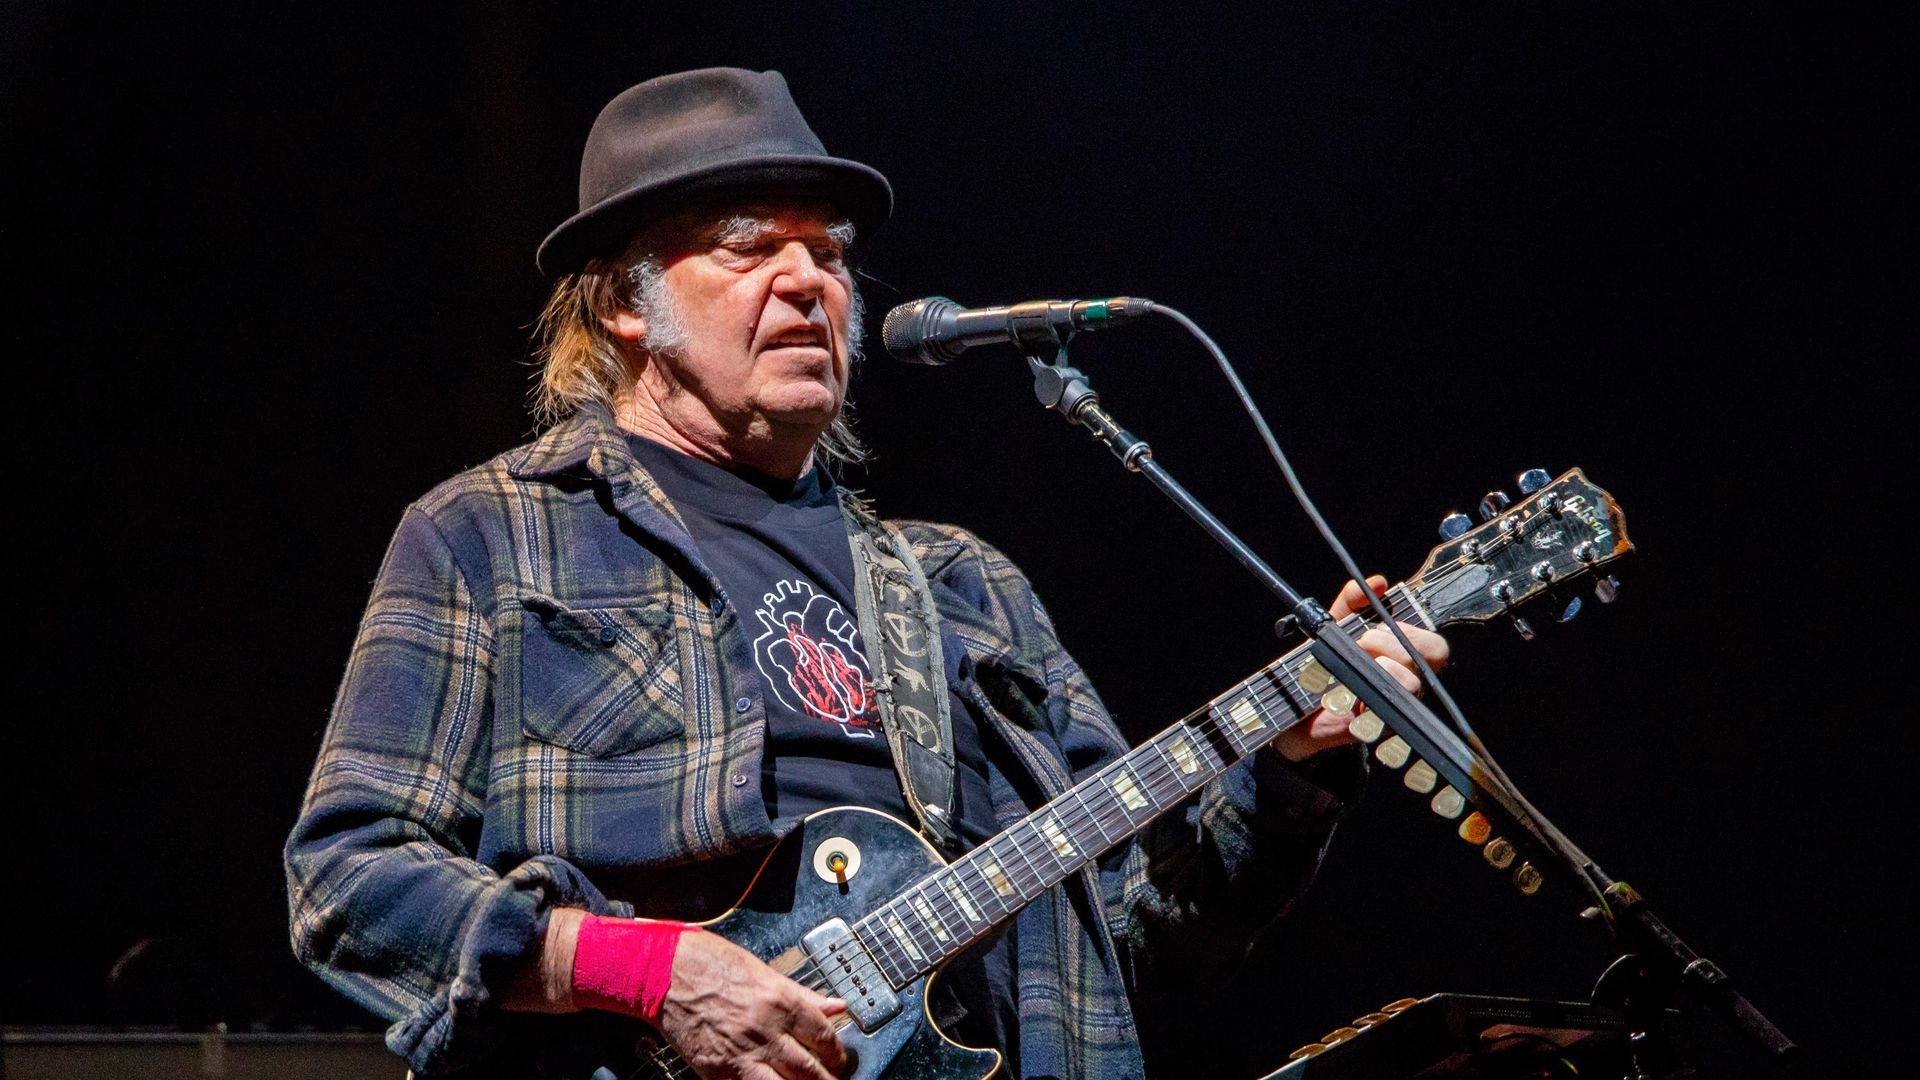 Spotify to remove Neil Young's music after his Joe Rogan ultimatum